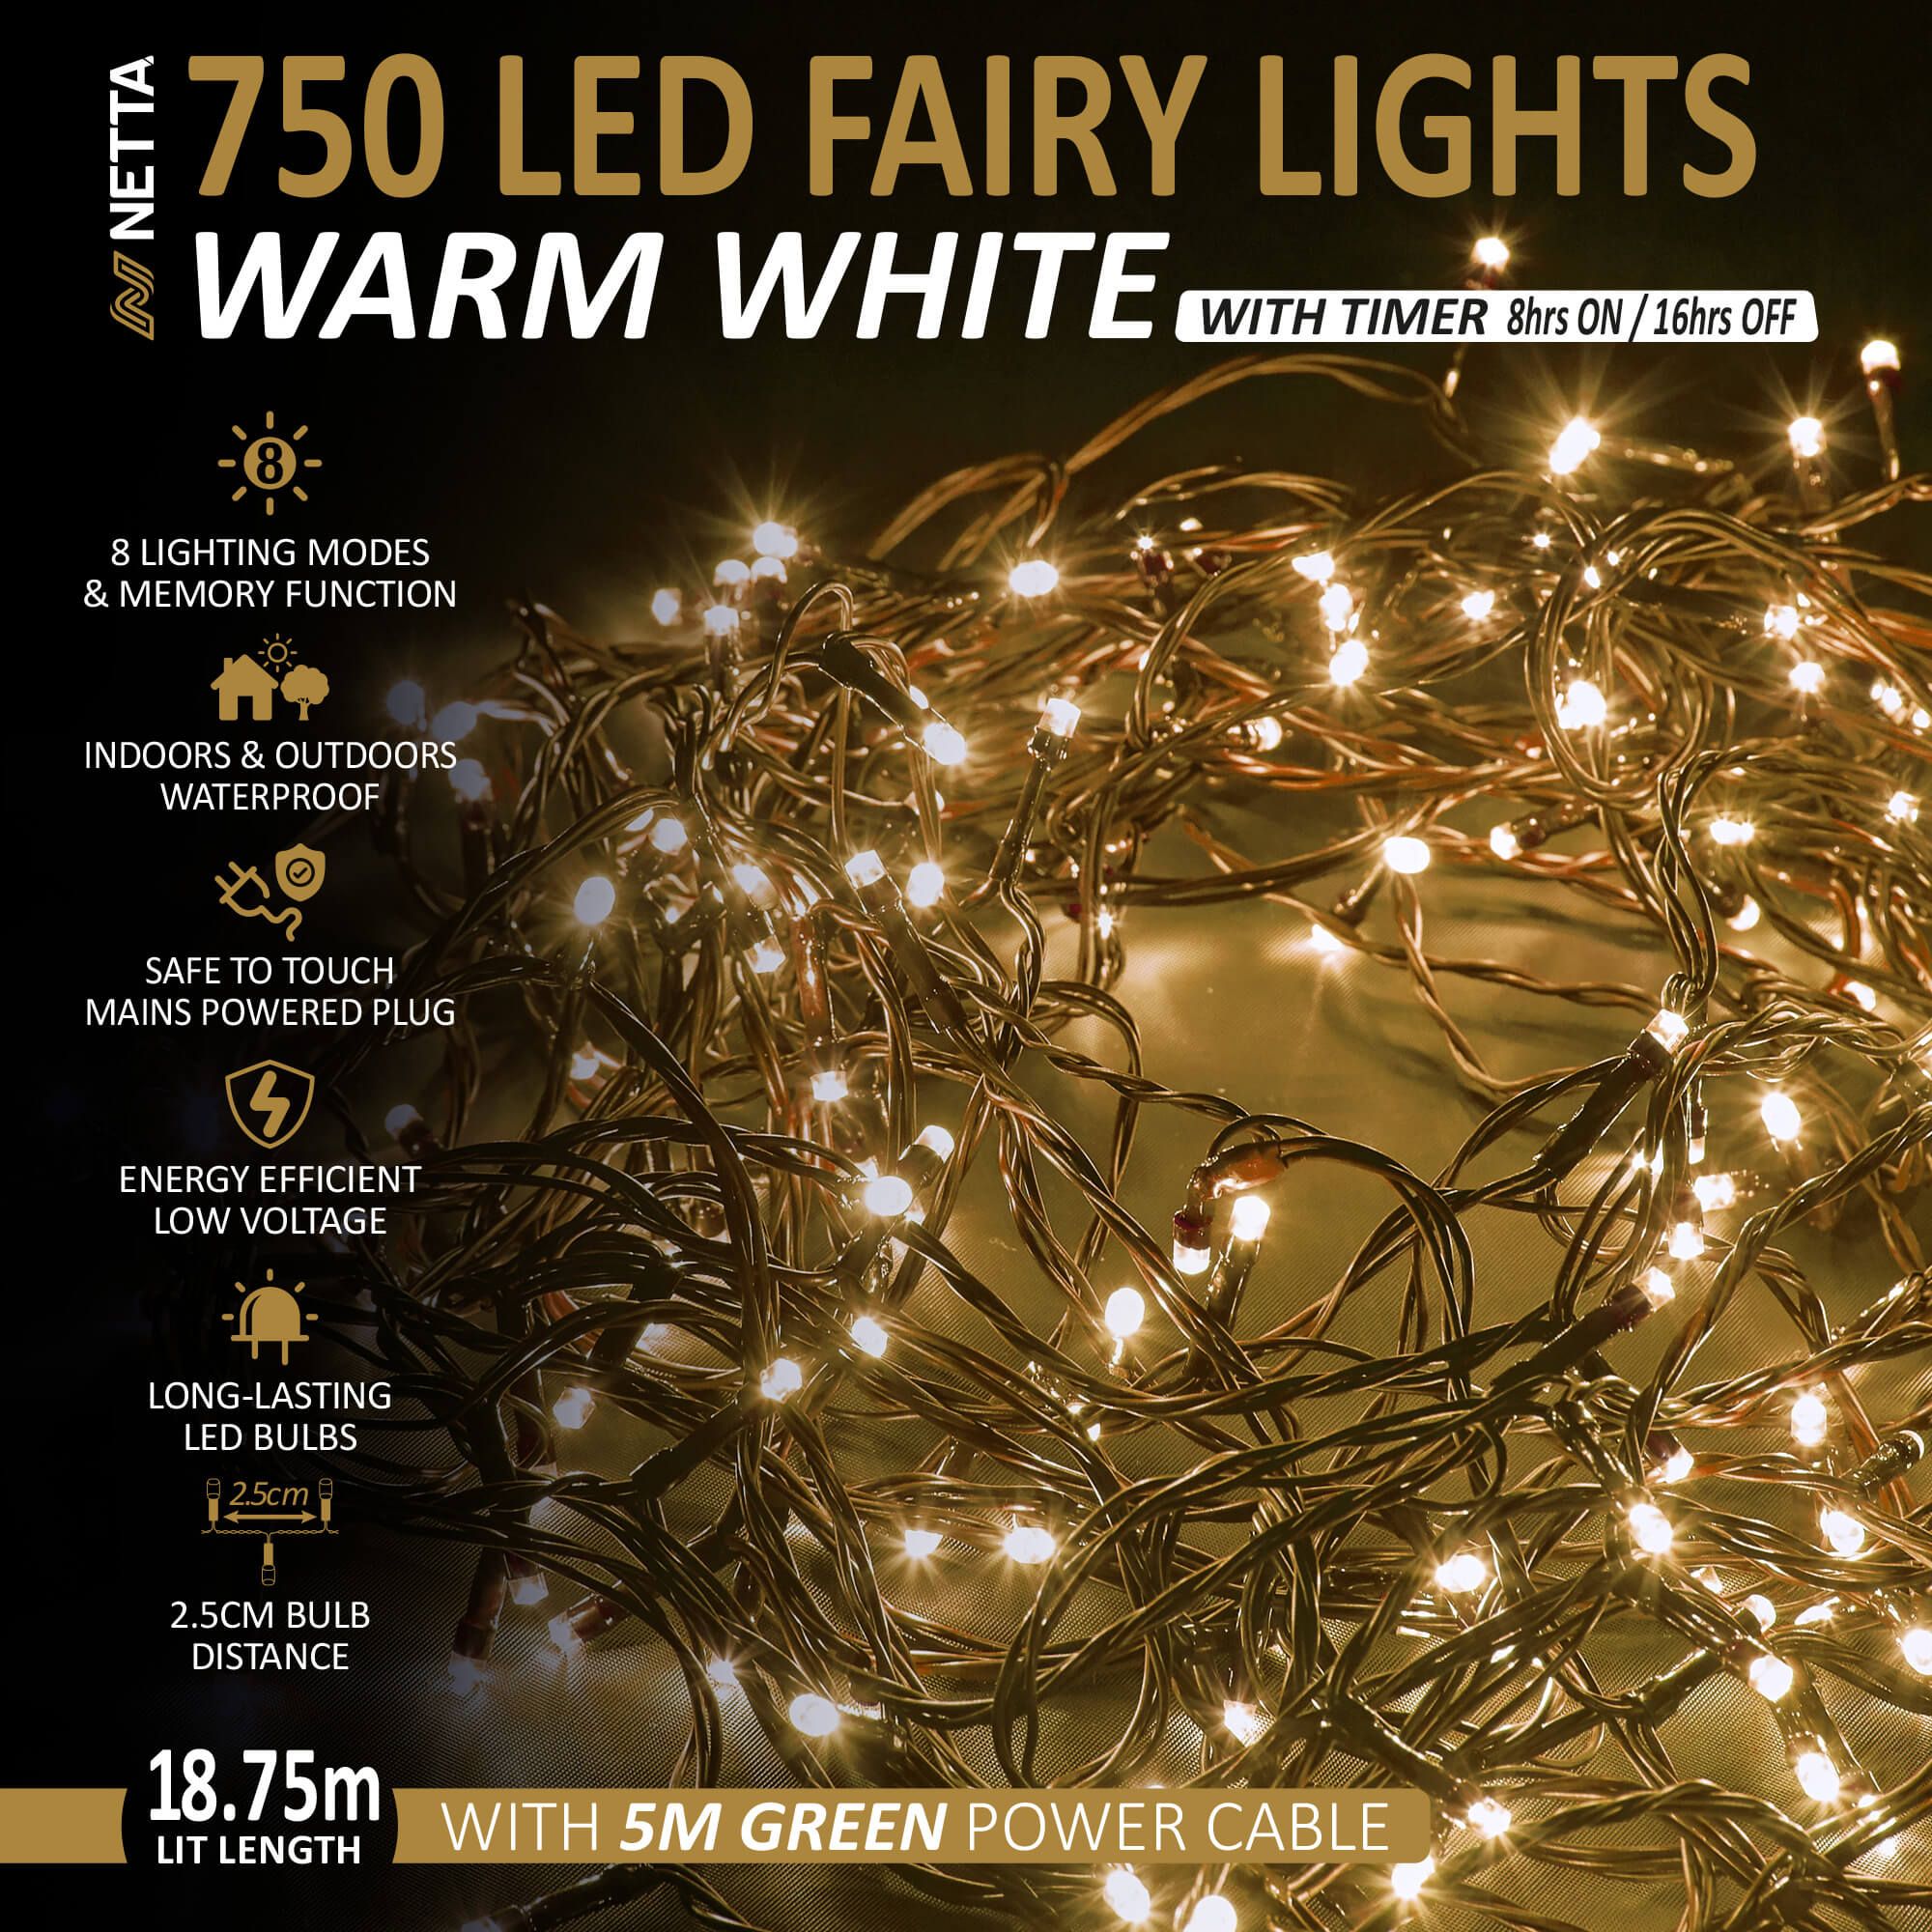 NETTA 750 LED Fairy String Lights 18.75M Indoor & Outdoor Christmas Tree Lights Green Cable - Warm White